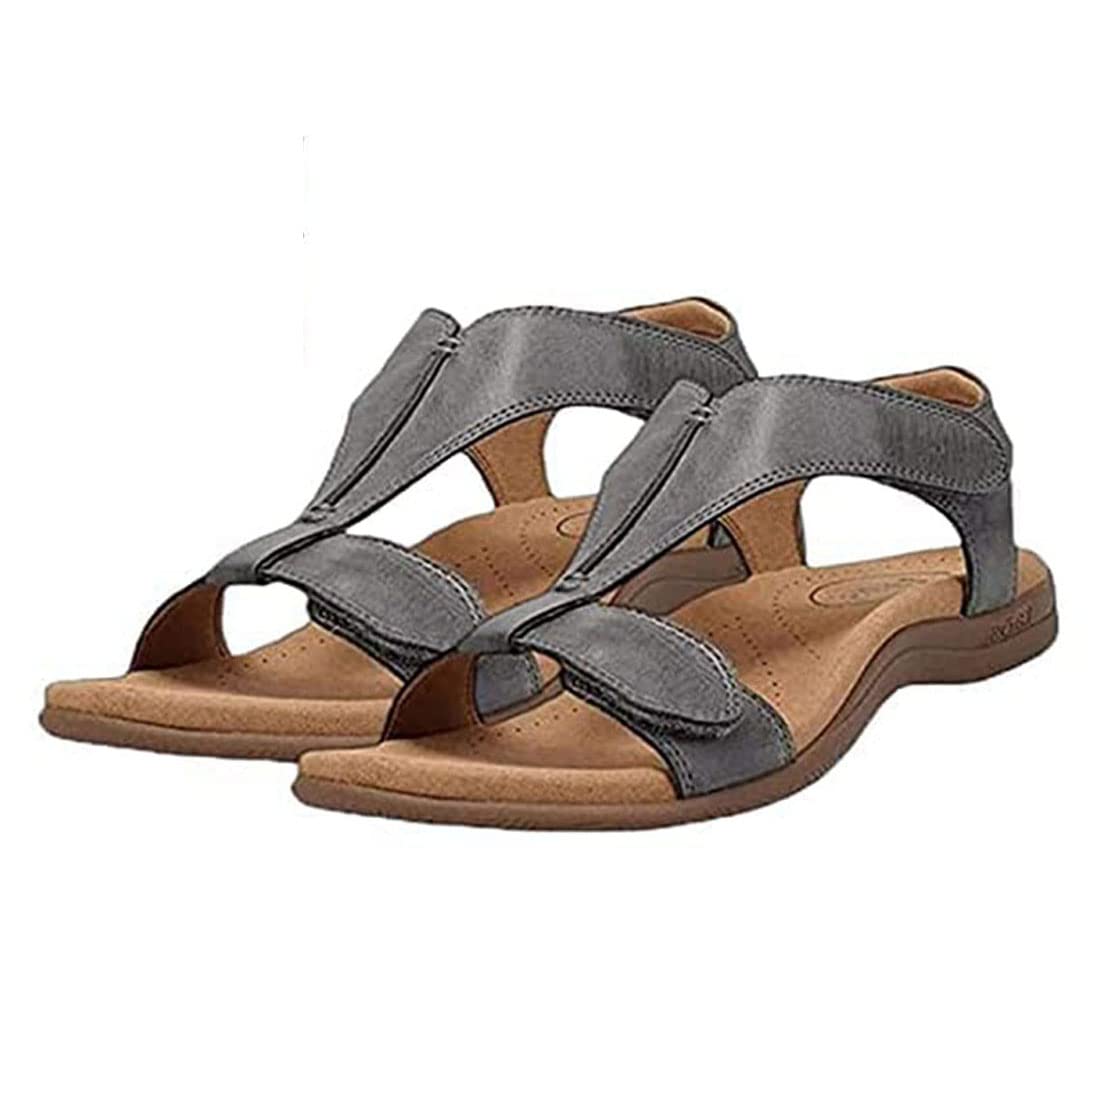 adviicd Braided Sandals for Women Orthopedic Bunion Corrector Sandals,Comfy  Platform Flat Sole PU Leather Shoes for Women Trendy - Walmart.com